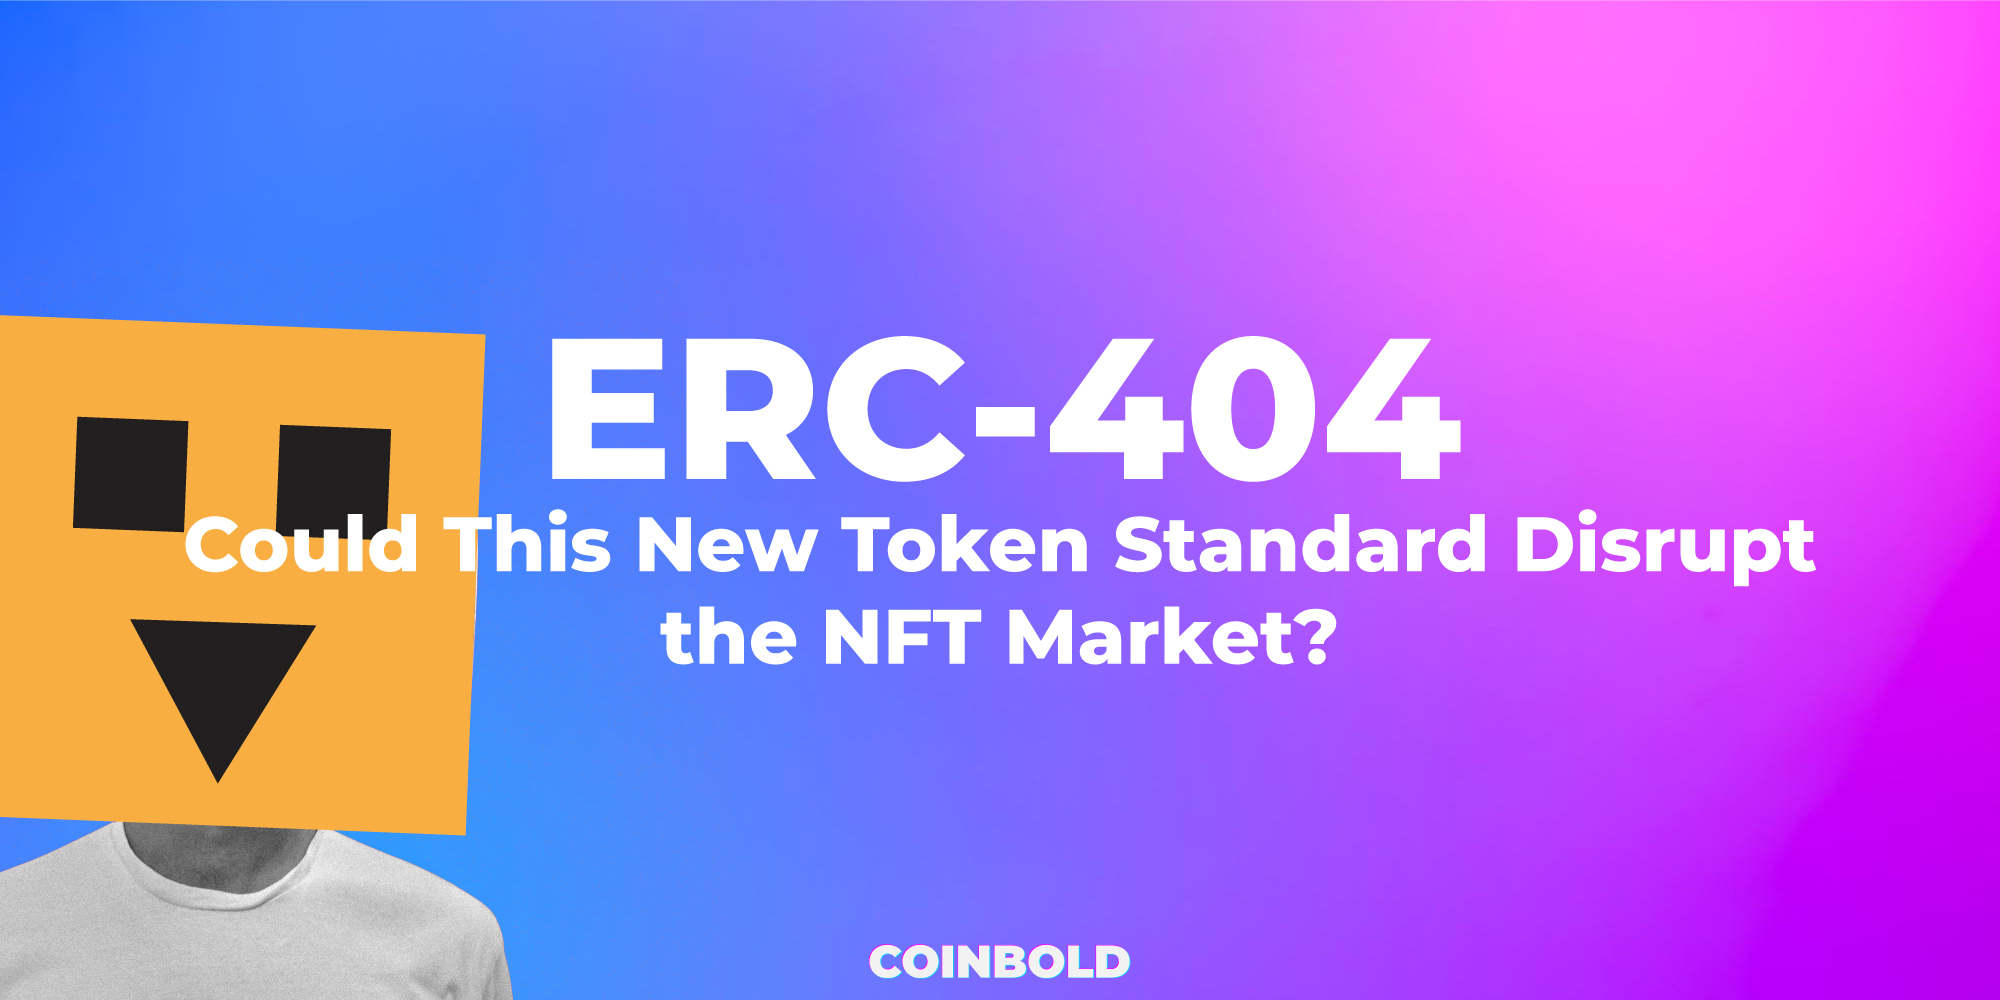 ERC-404: Could This New Token Standard Disrupt the NFT Market?